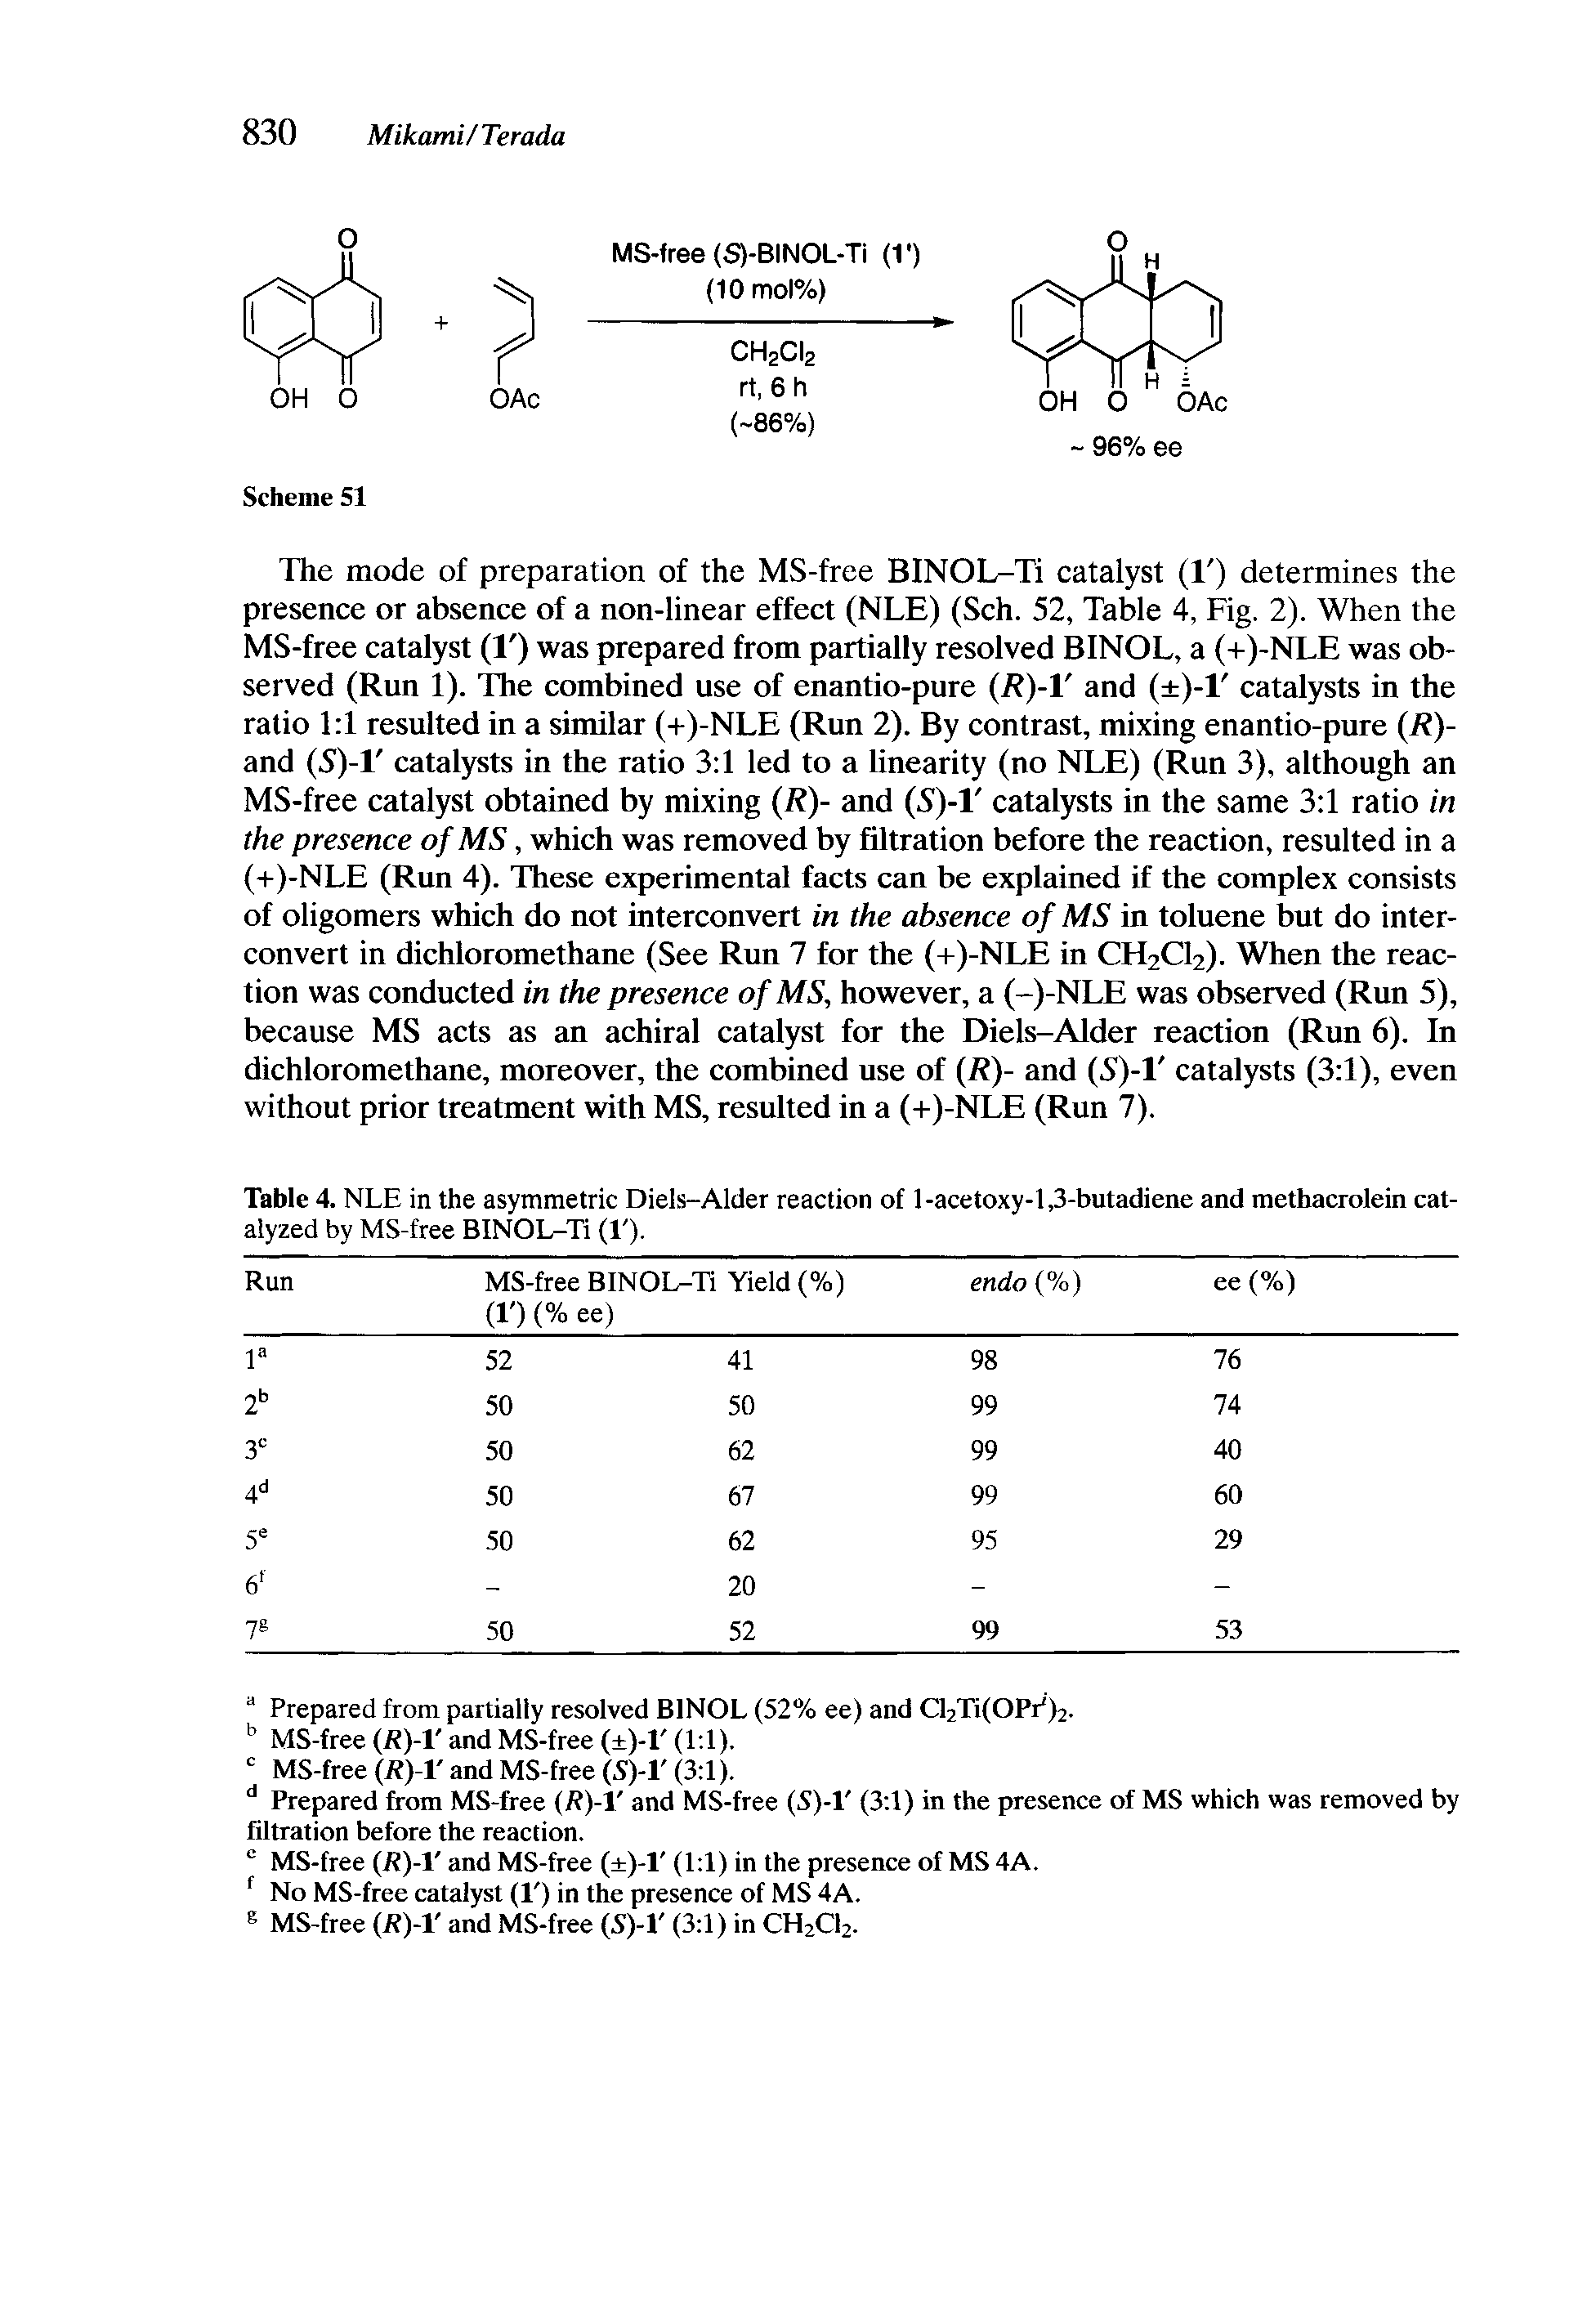 Table 4. NLE in the asymmetric Diels-Alder reaction of 1-acetoxy-l,3-butadiene and methacrolein catalyzed by MS-free BINOL-Ti ( ).